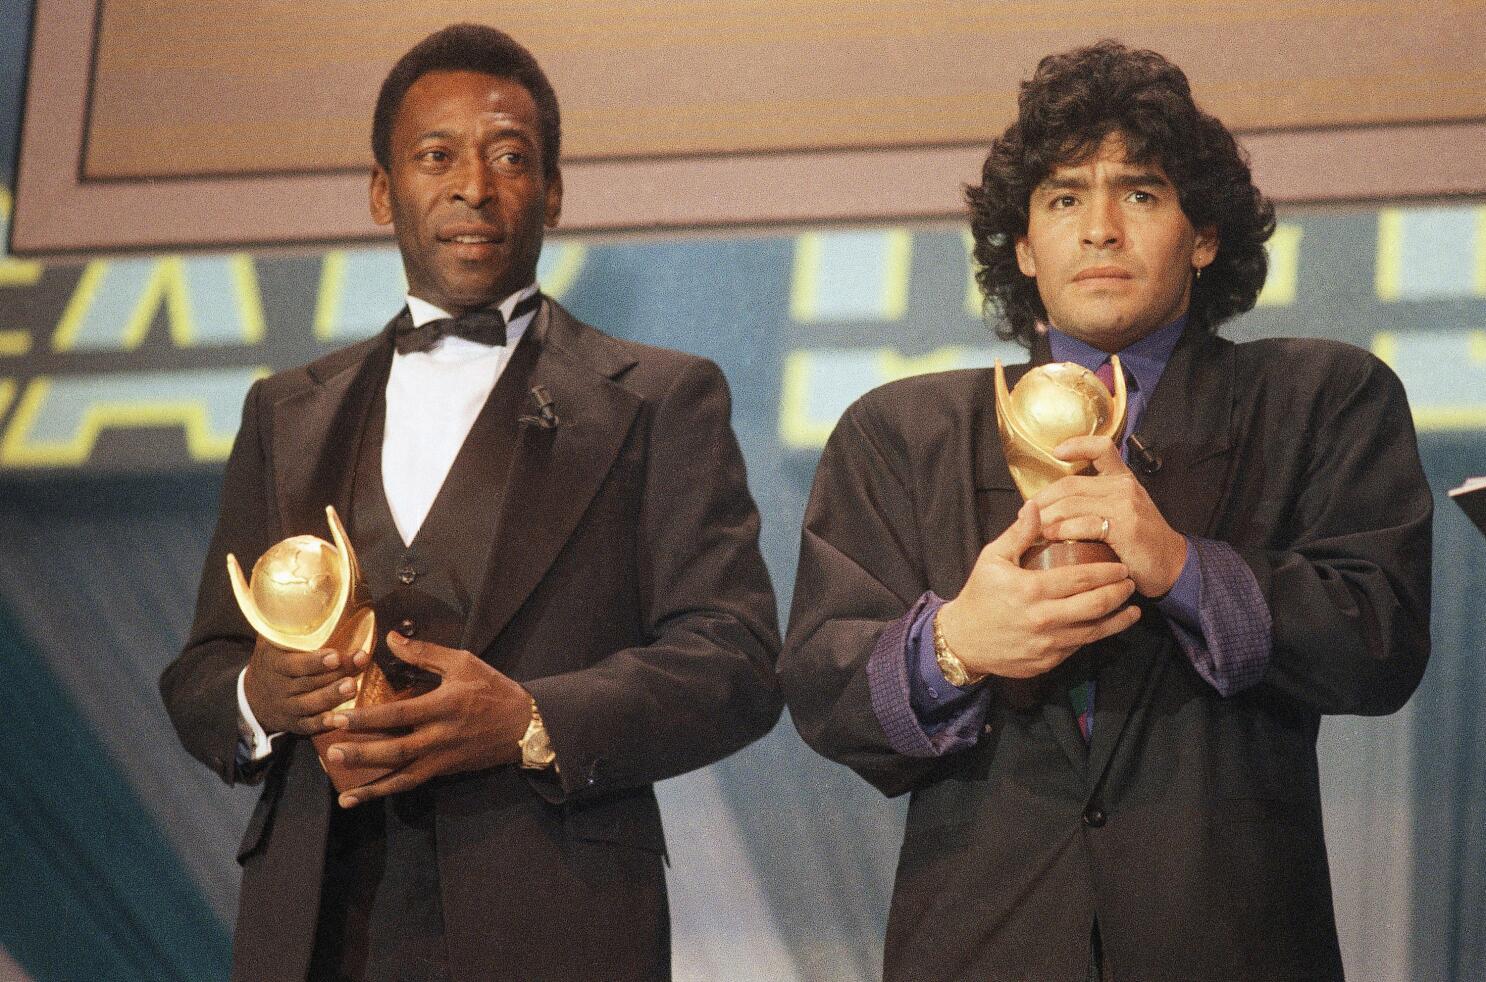 Lionel Messi, Maradona, and Pele: Who is greatest player of all time?